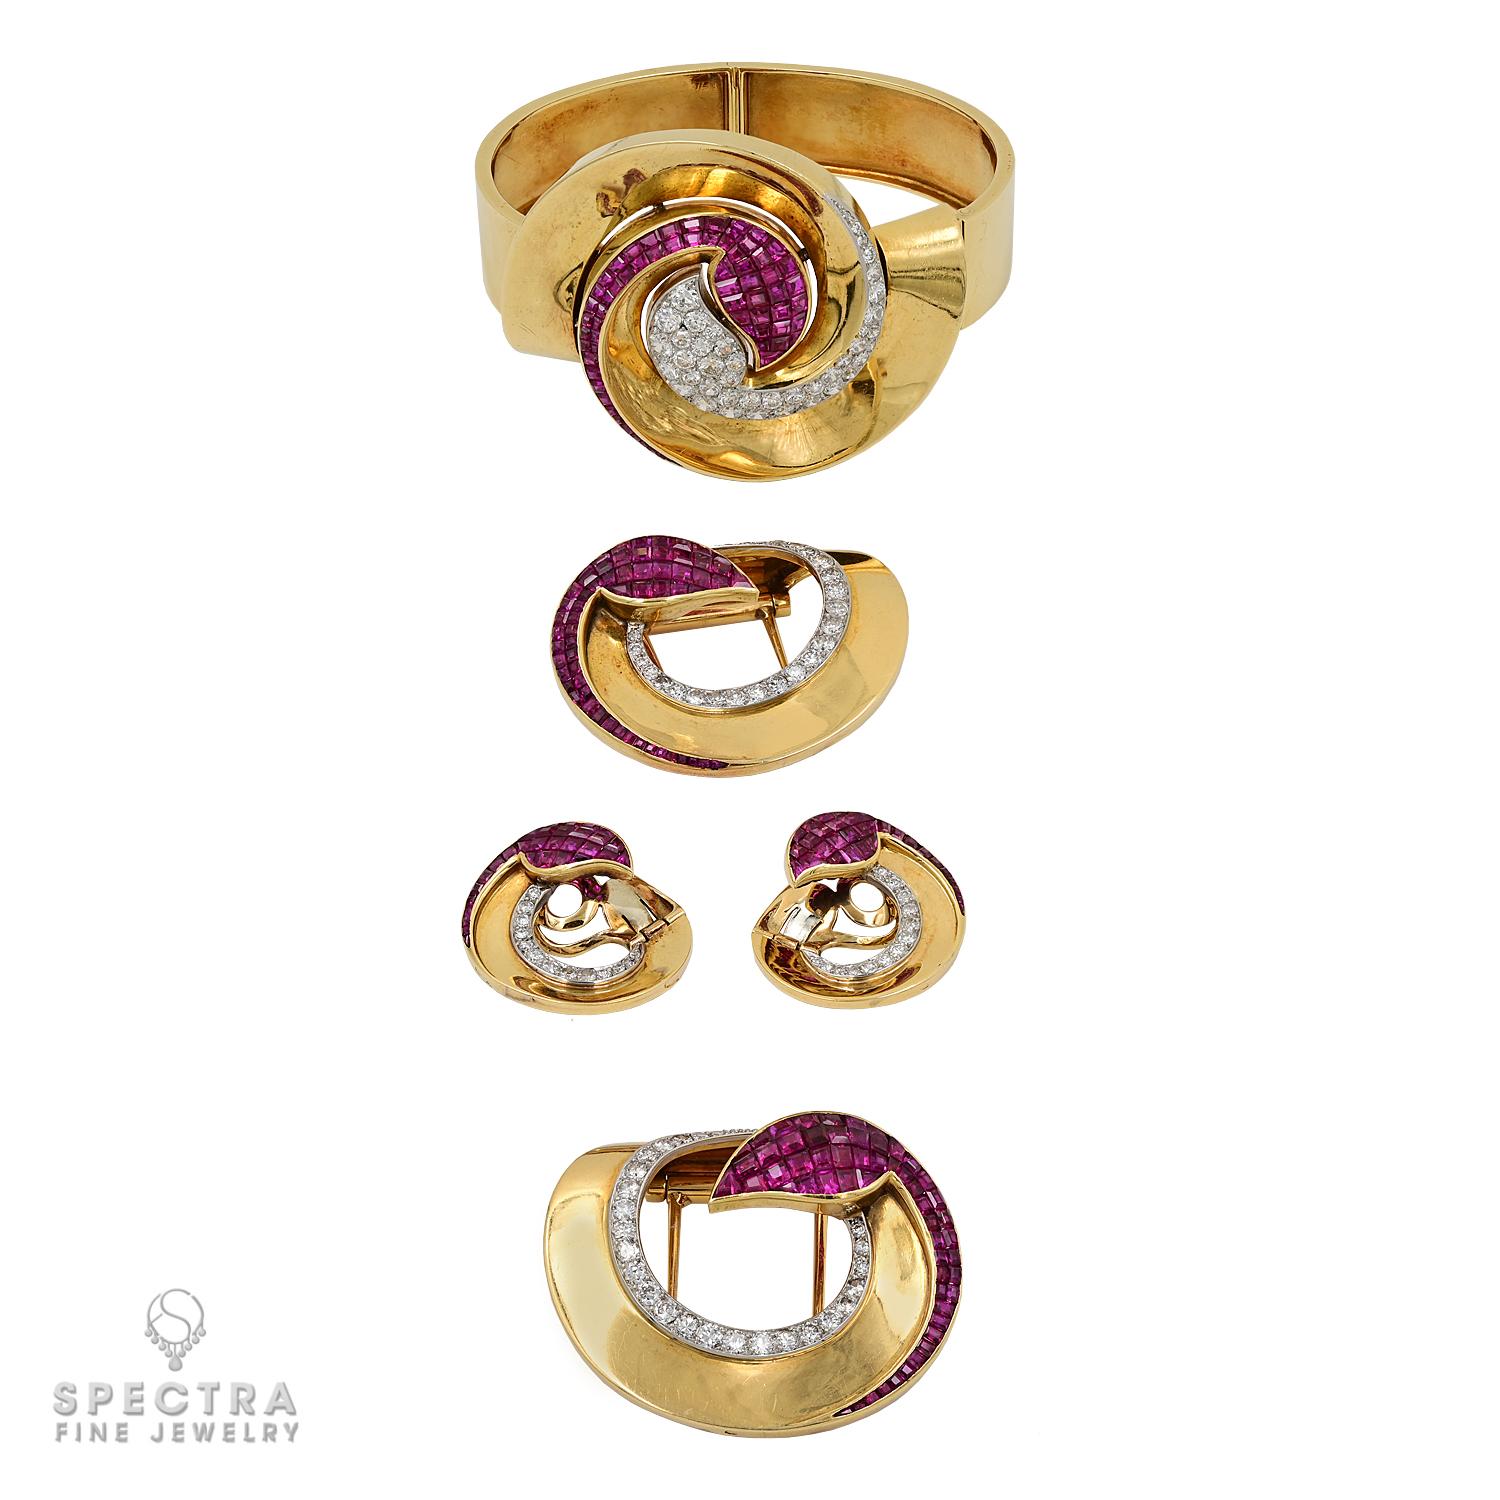 Captivating and enigmatic, the serpent has been a timeless theme in jewelry, and this Boucheron Invisibly-Set Ruby and Diamond Suite, crafted in France in 1930 during the Art Deco era, embodies its allure. Consisting of four distinct pieces — a